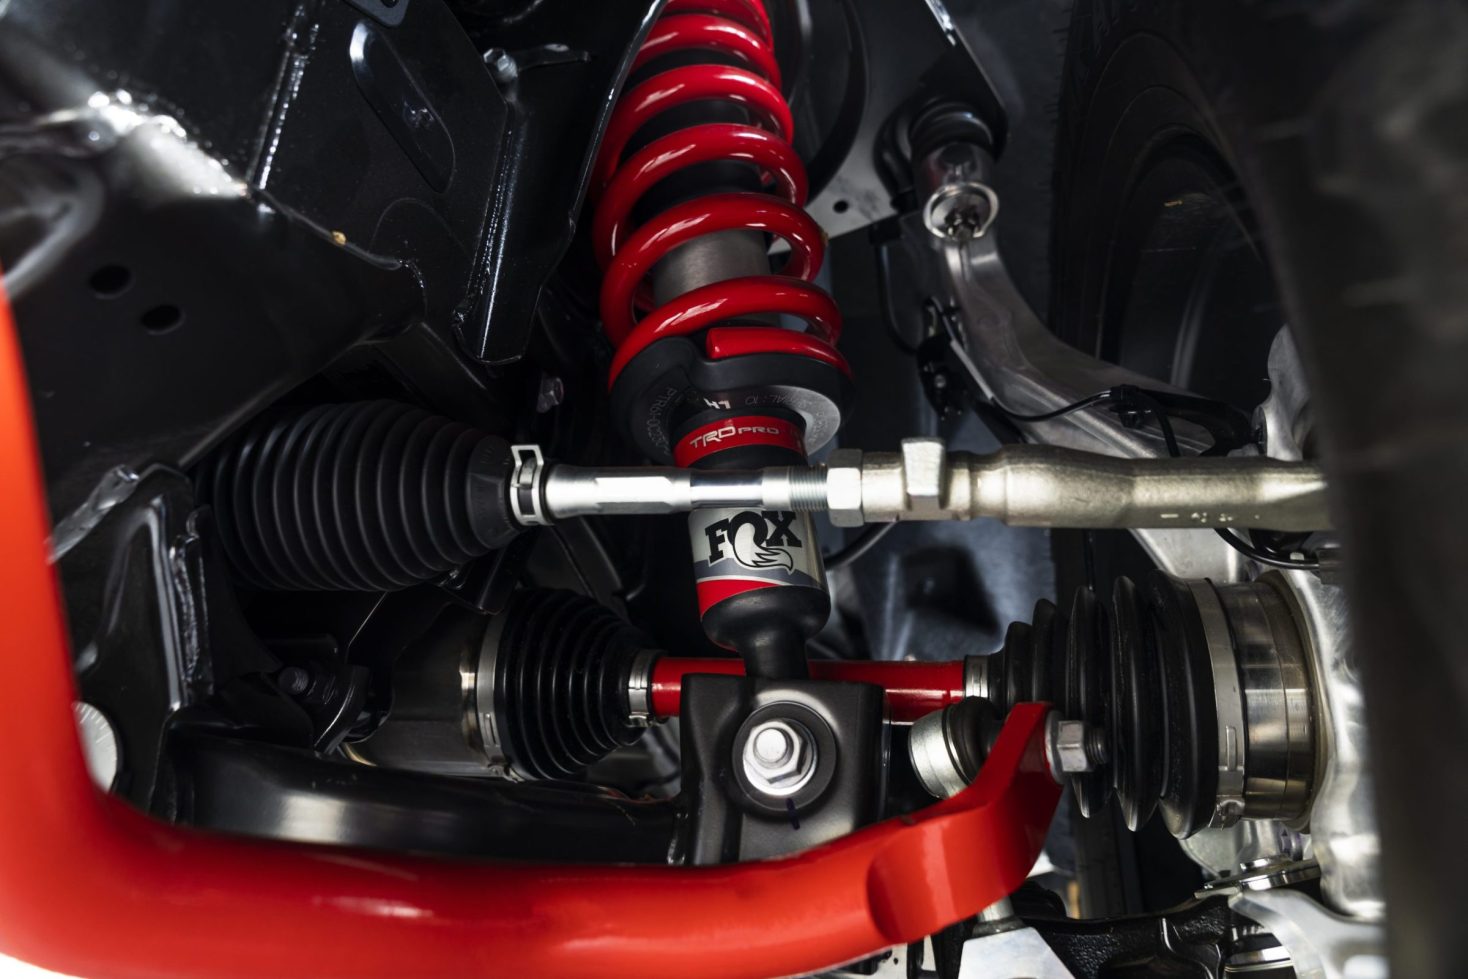 How to Choose the Right Car Suspension for a Comfortable Ride Quality in Your SUV